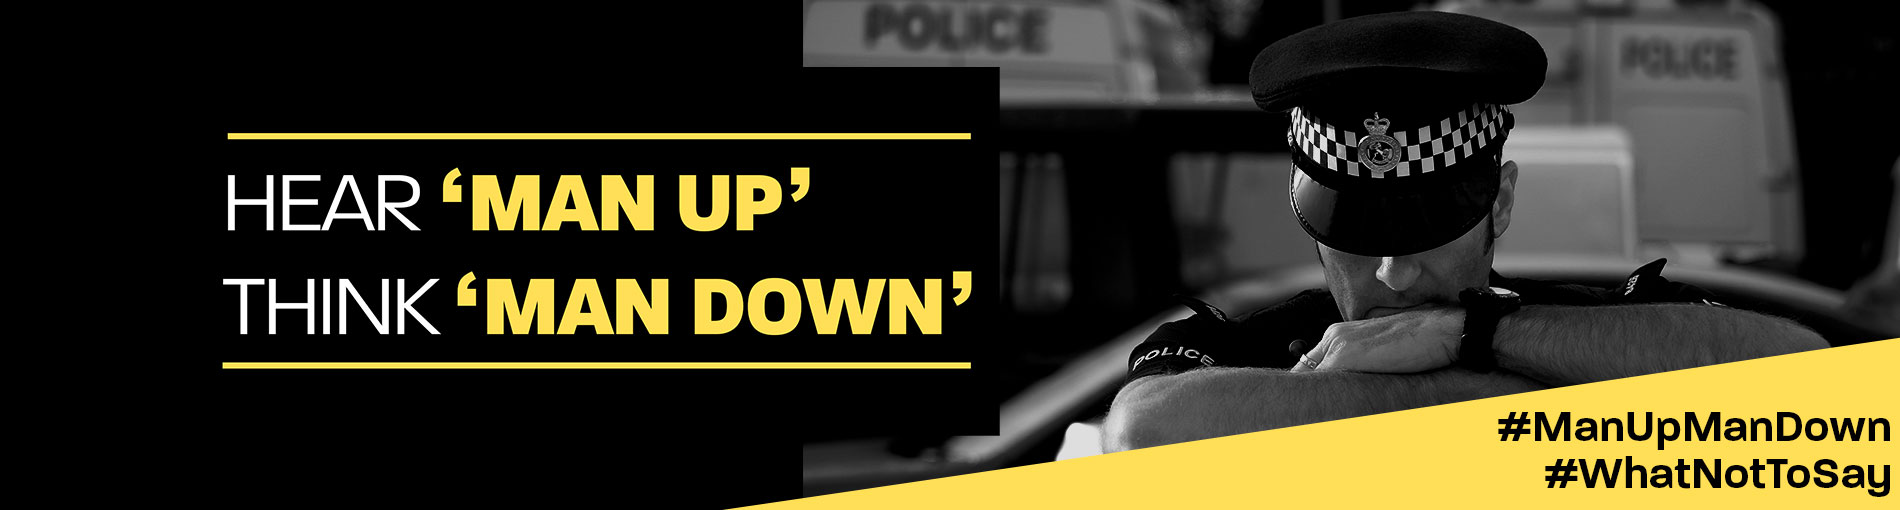 Man up man down campaign banner